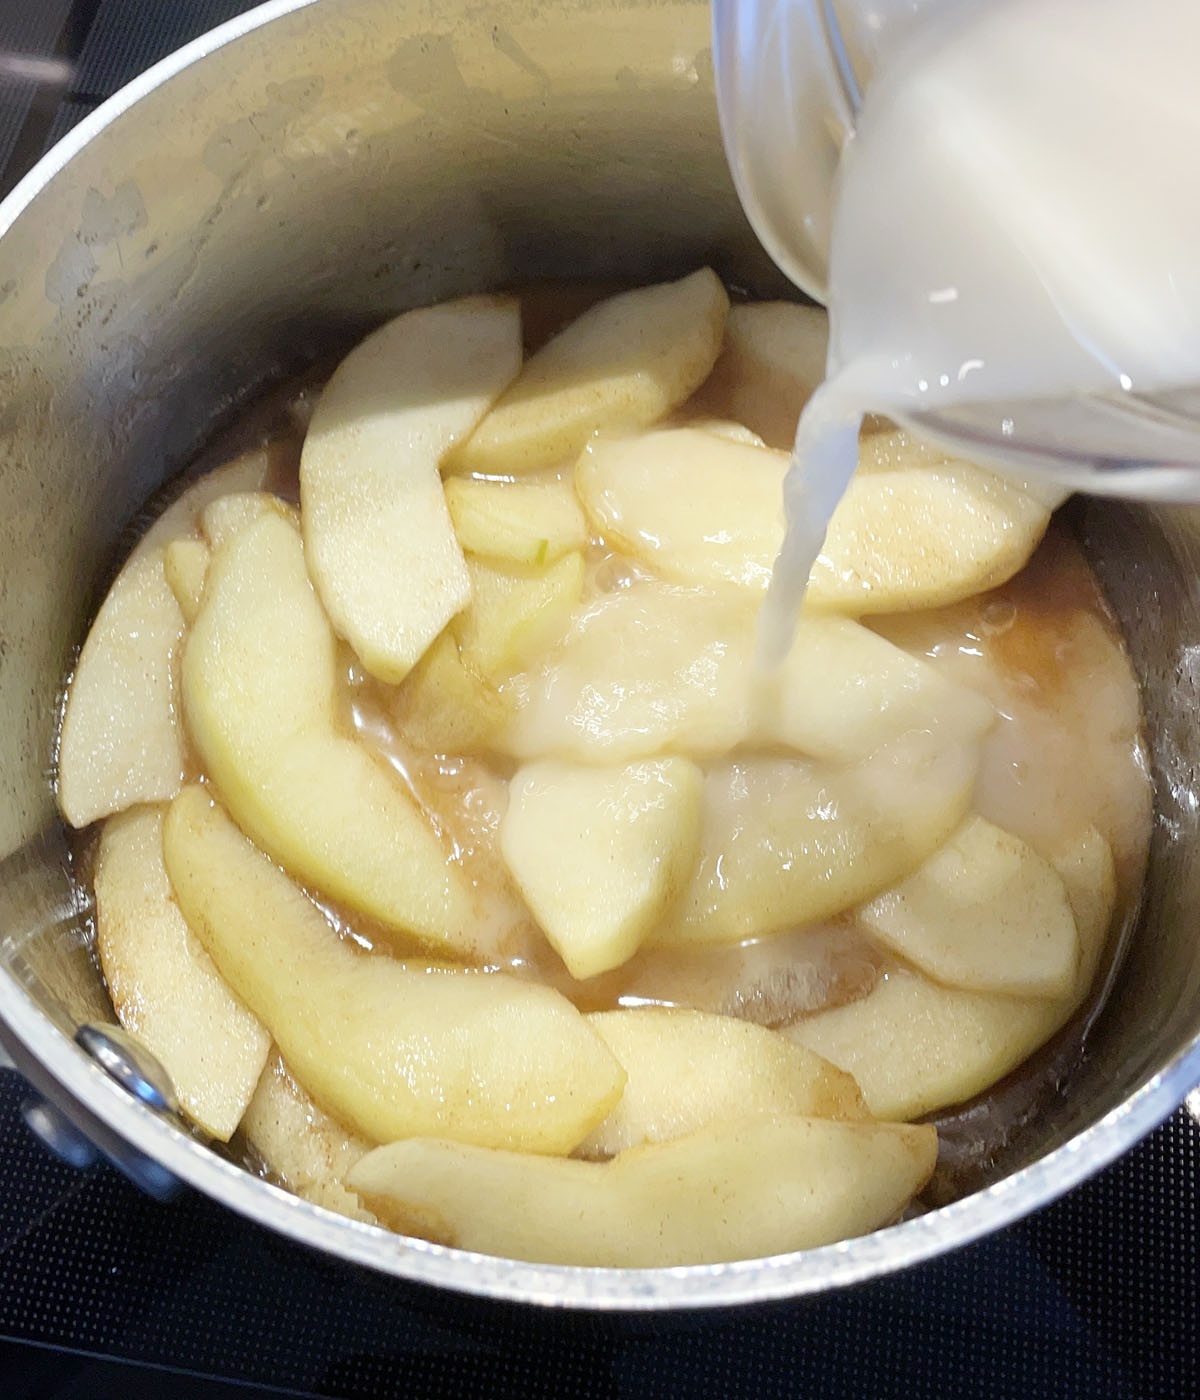 A white liquid being poured into a metal pot containing apple slices.